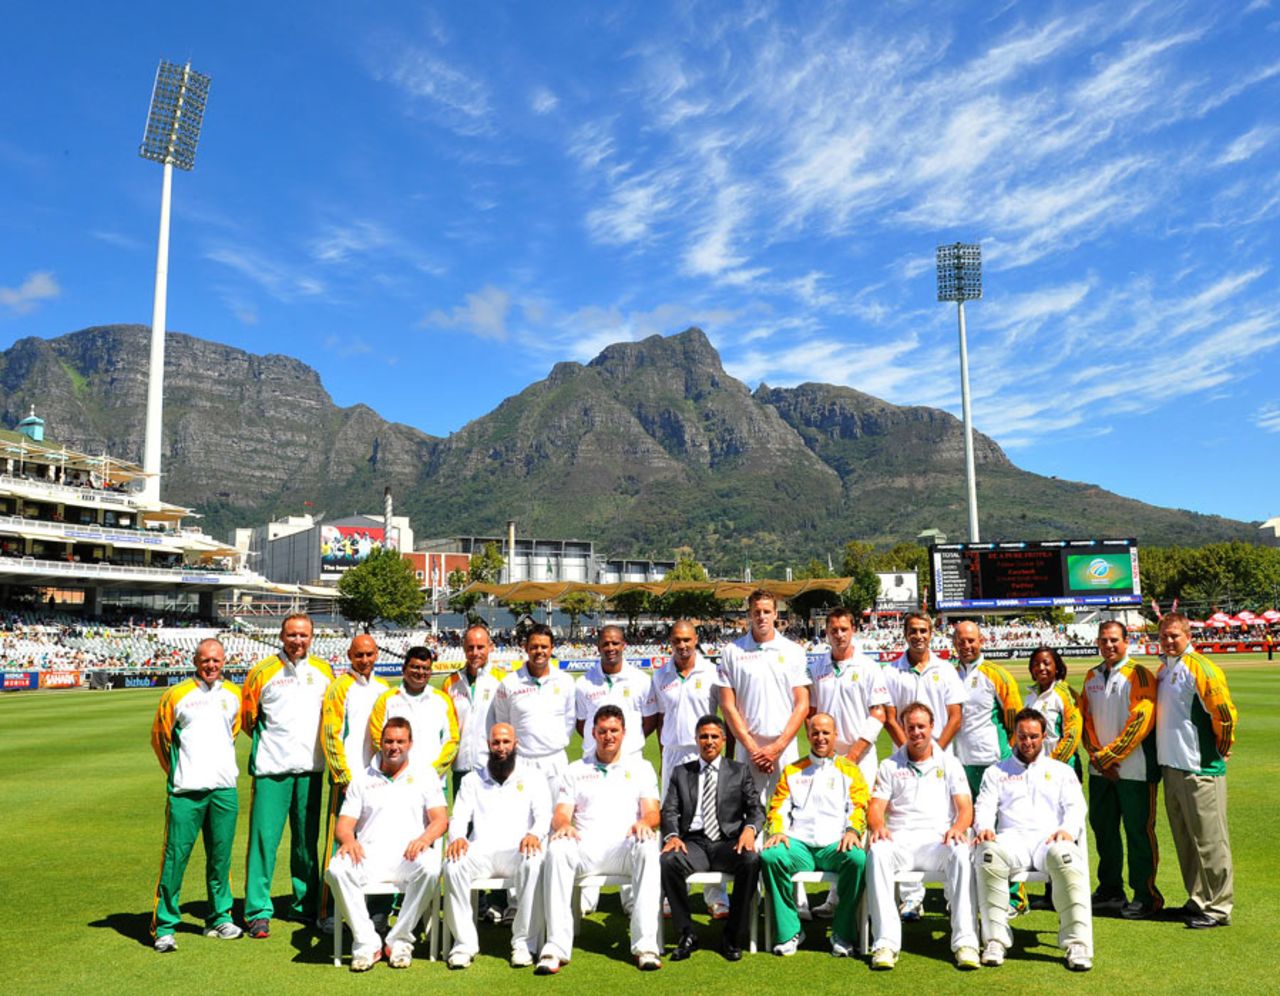 The South African team pose for a photo with the Table Mountain as the backdrop, South Africa v Sri Lanka, 3rd Test, Cape Town, 3rd day, January 5, 2012